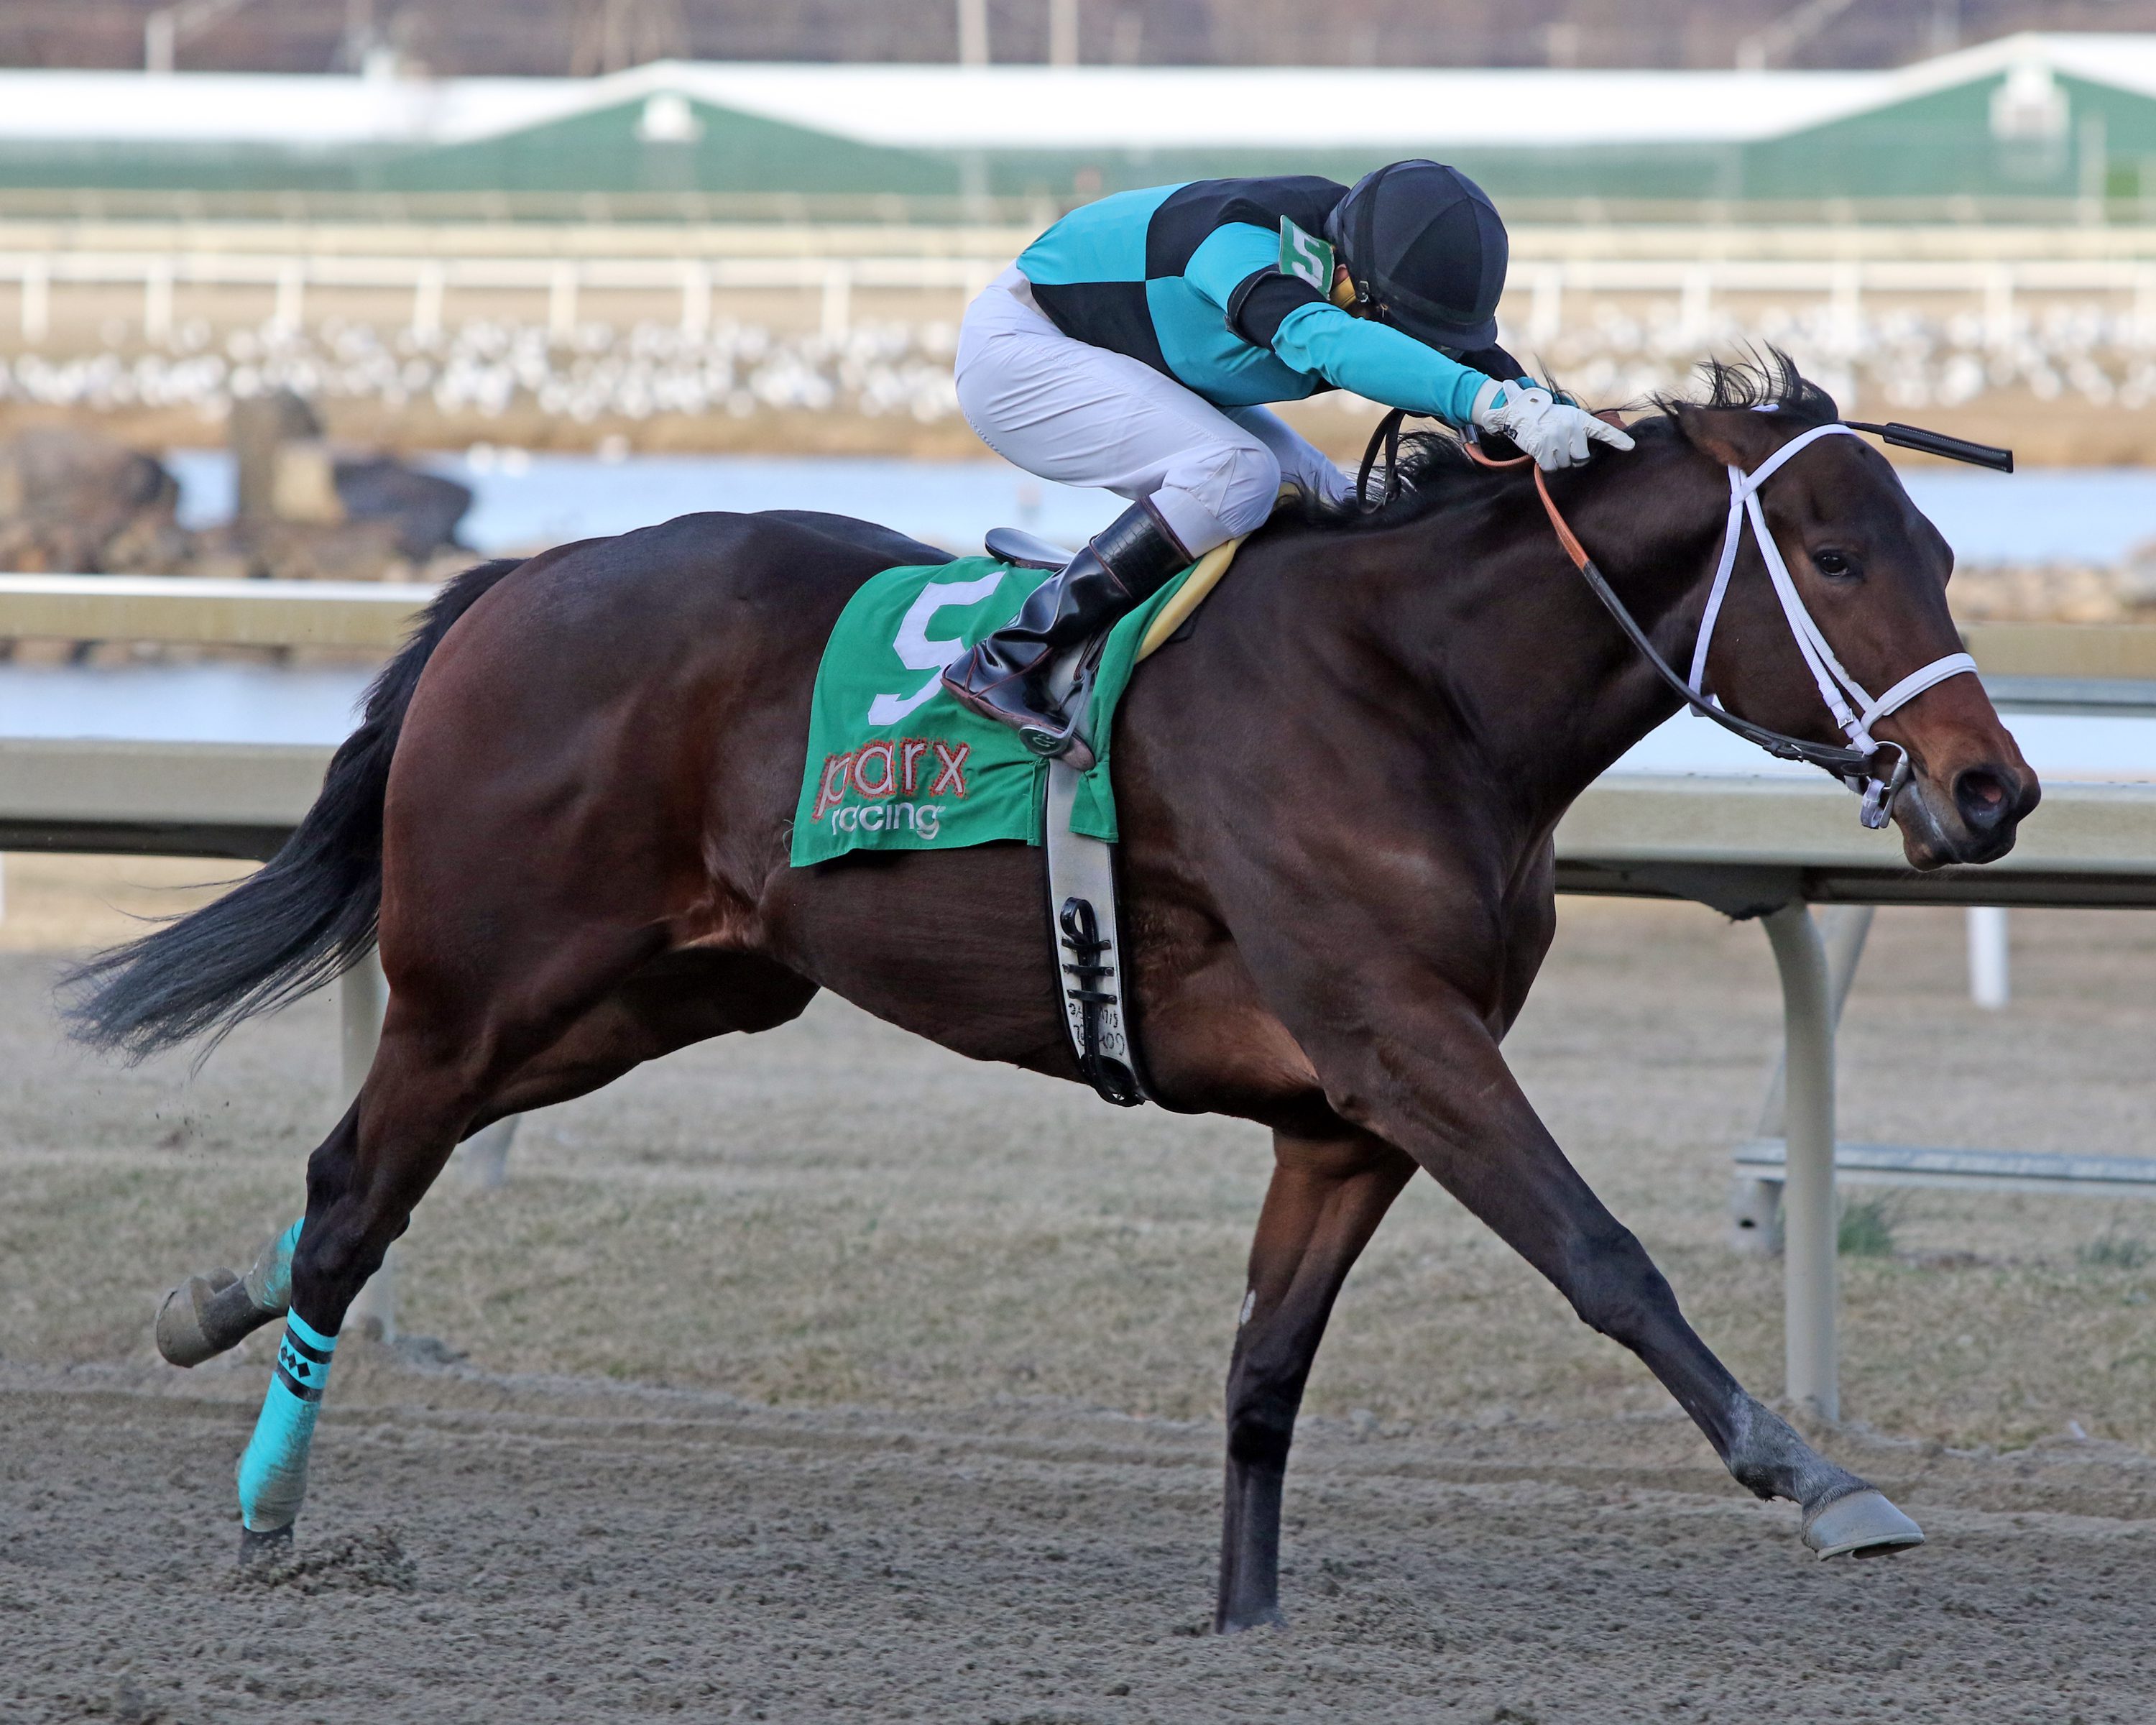 Scaramouche with Silvestre Gonzalez win The Rittenhouse Square at Parx on March 8, 2022. Photo By: Chad B. Harmon